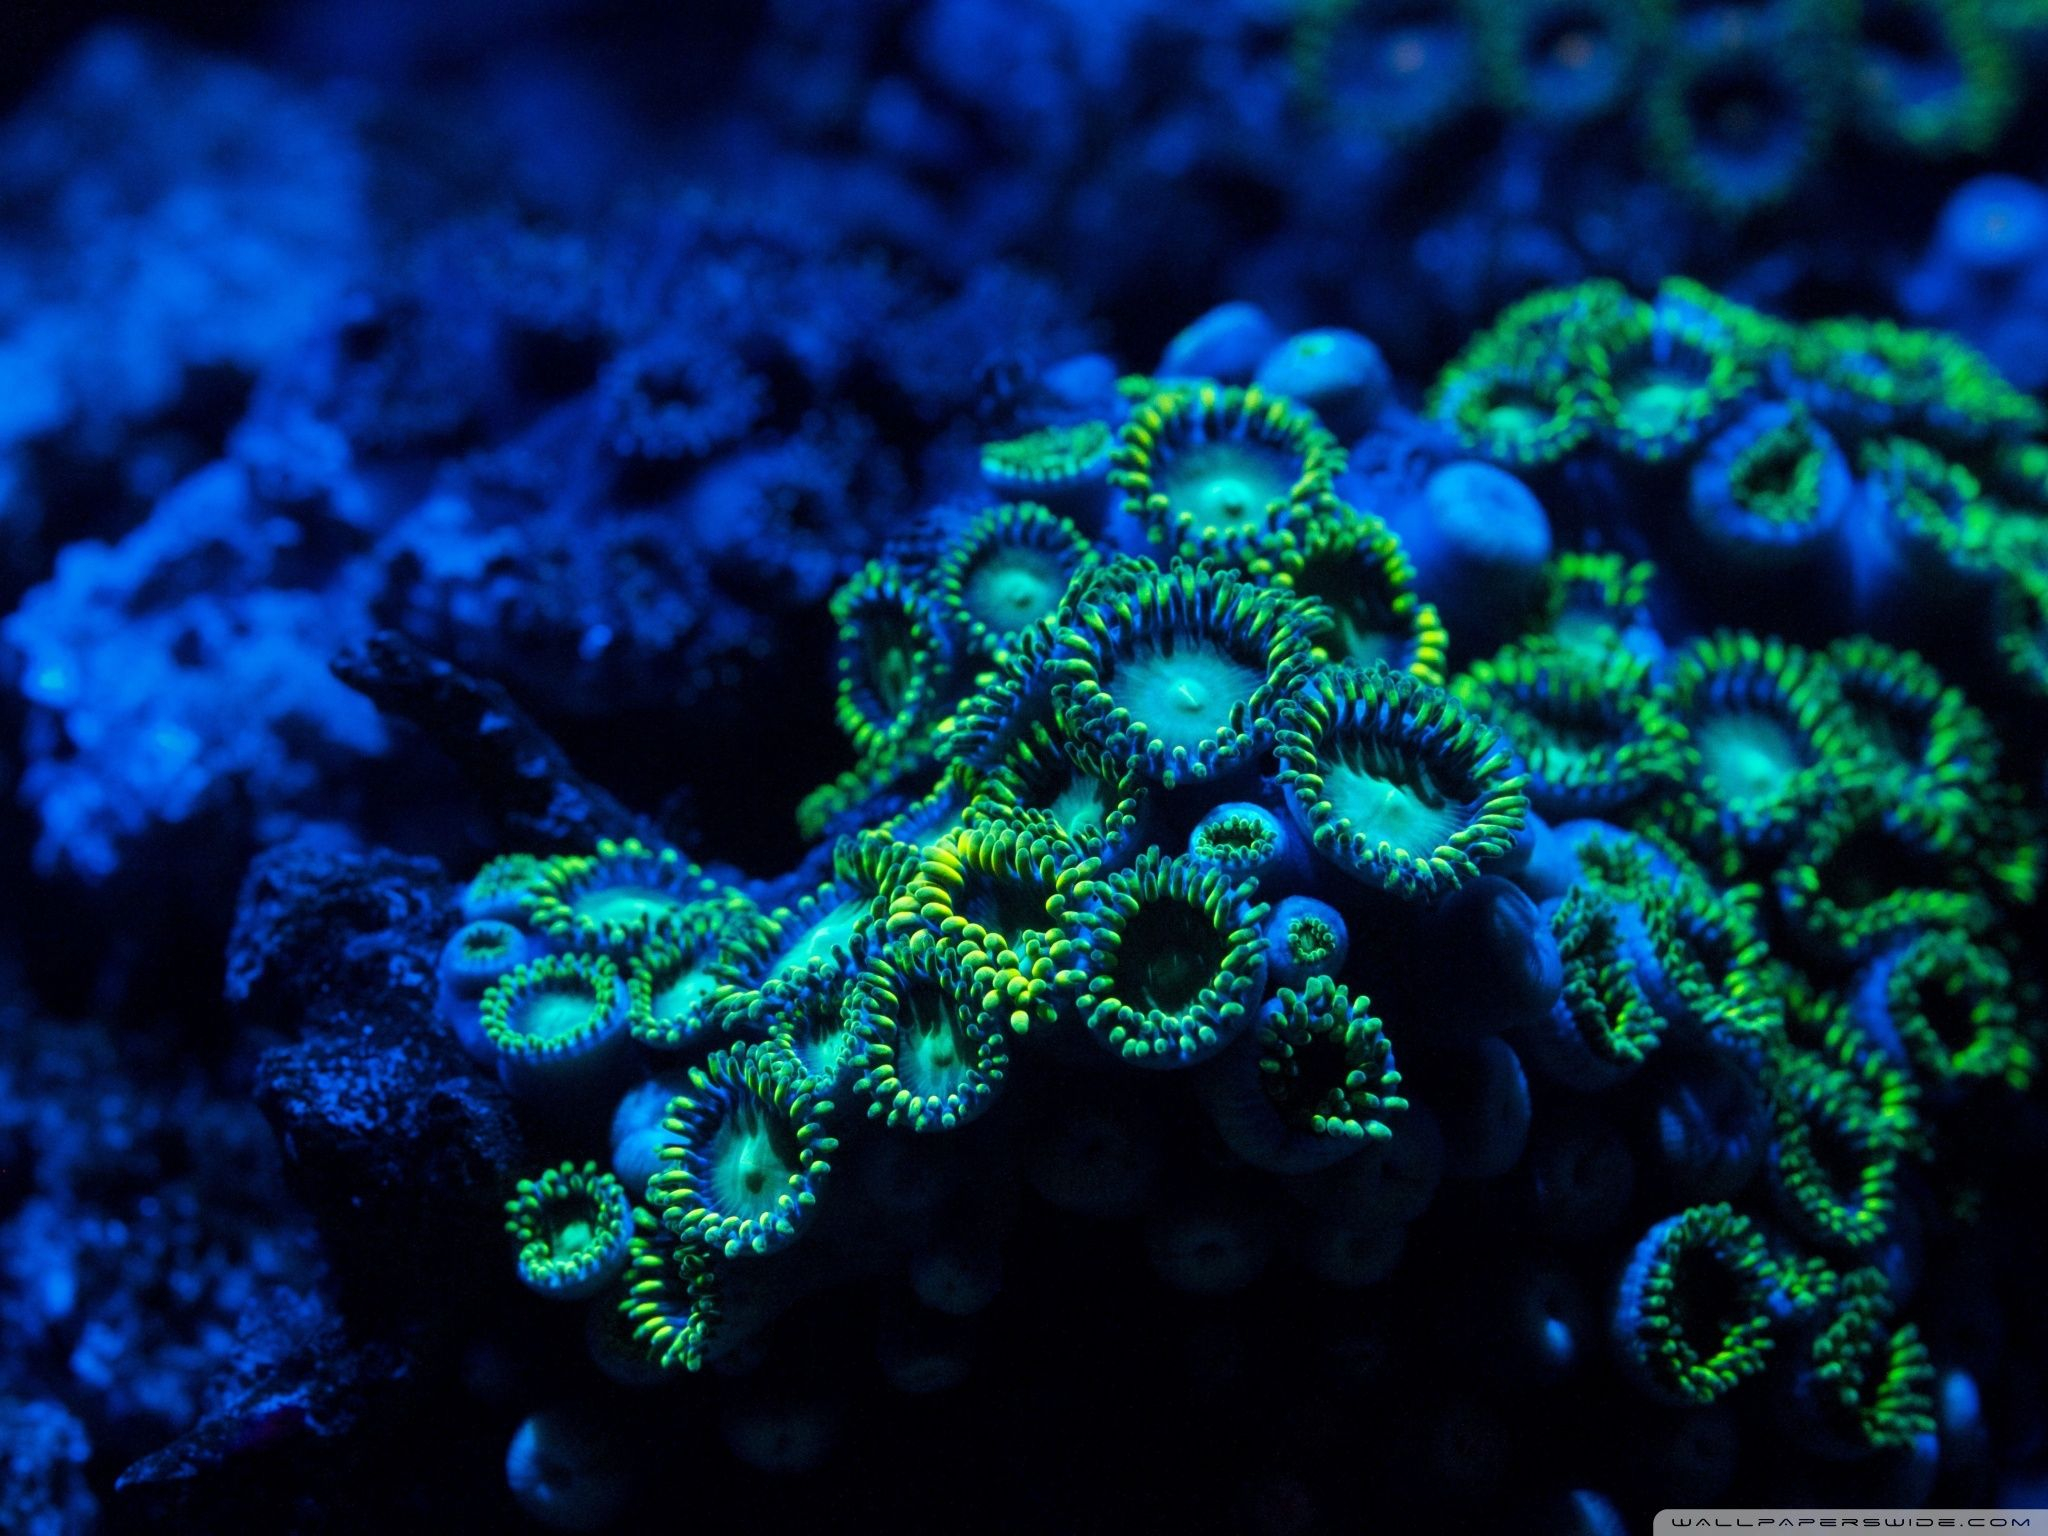 2048x1536 coral Google Search | Underwater wallpaper, Coral reef, Under the sea